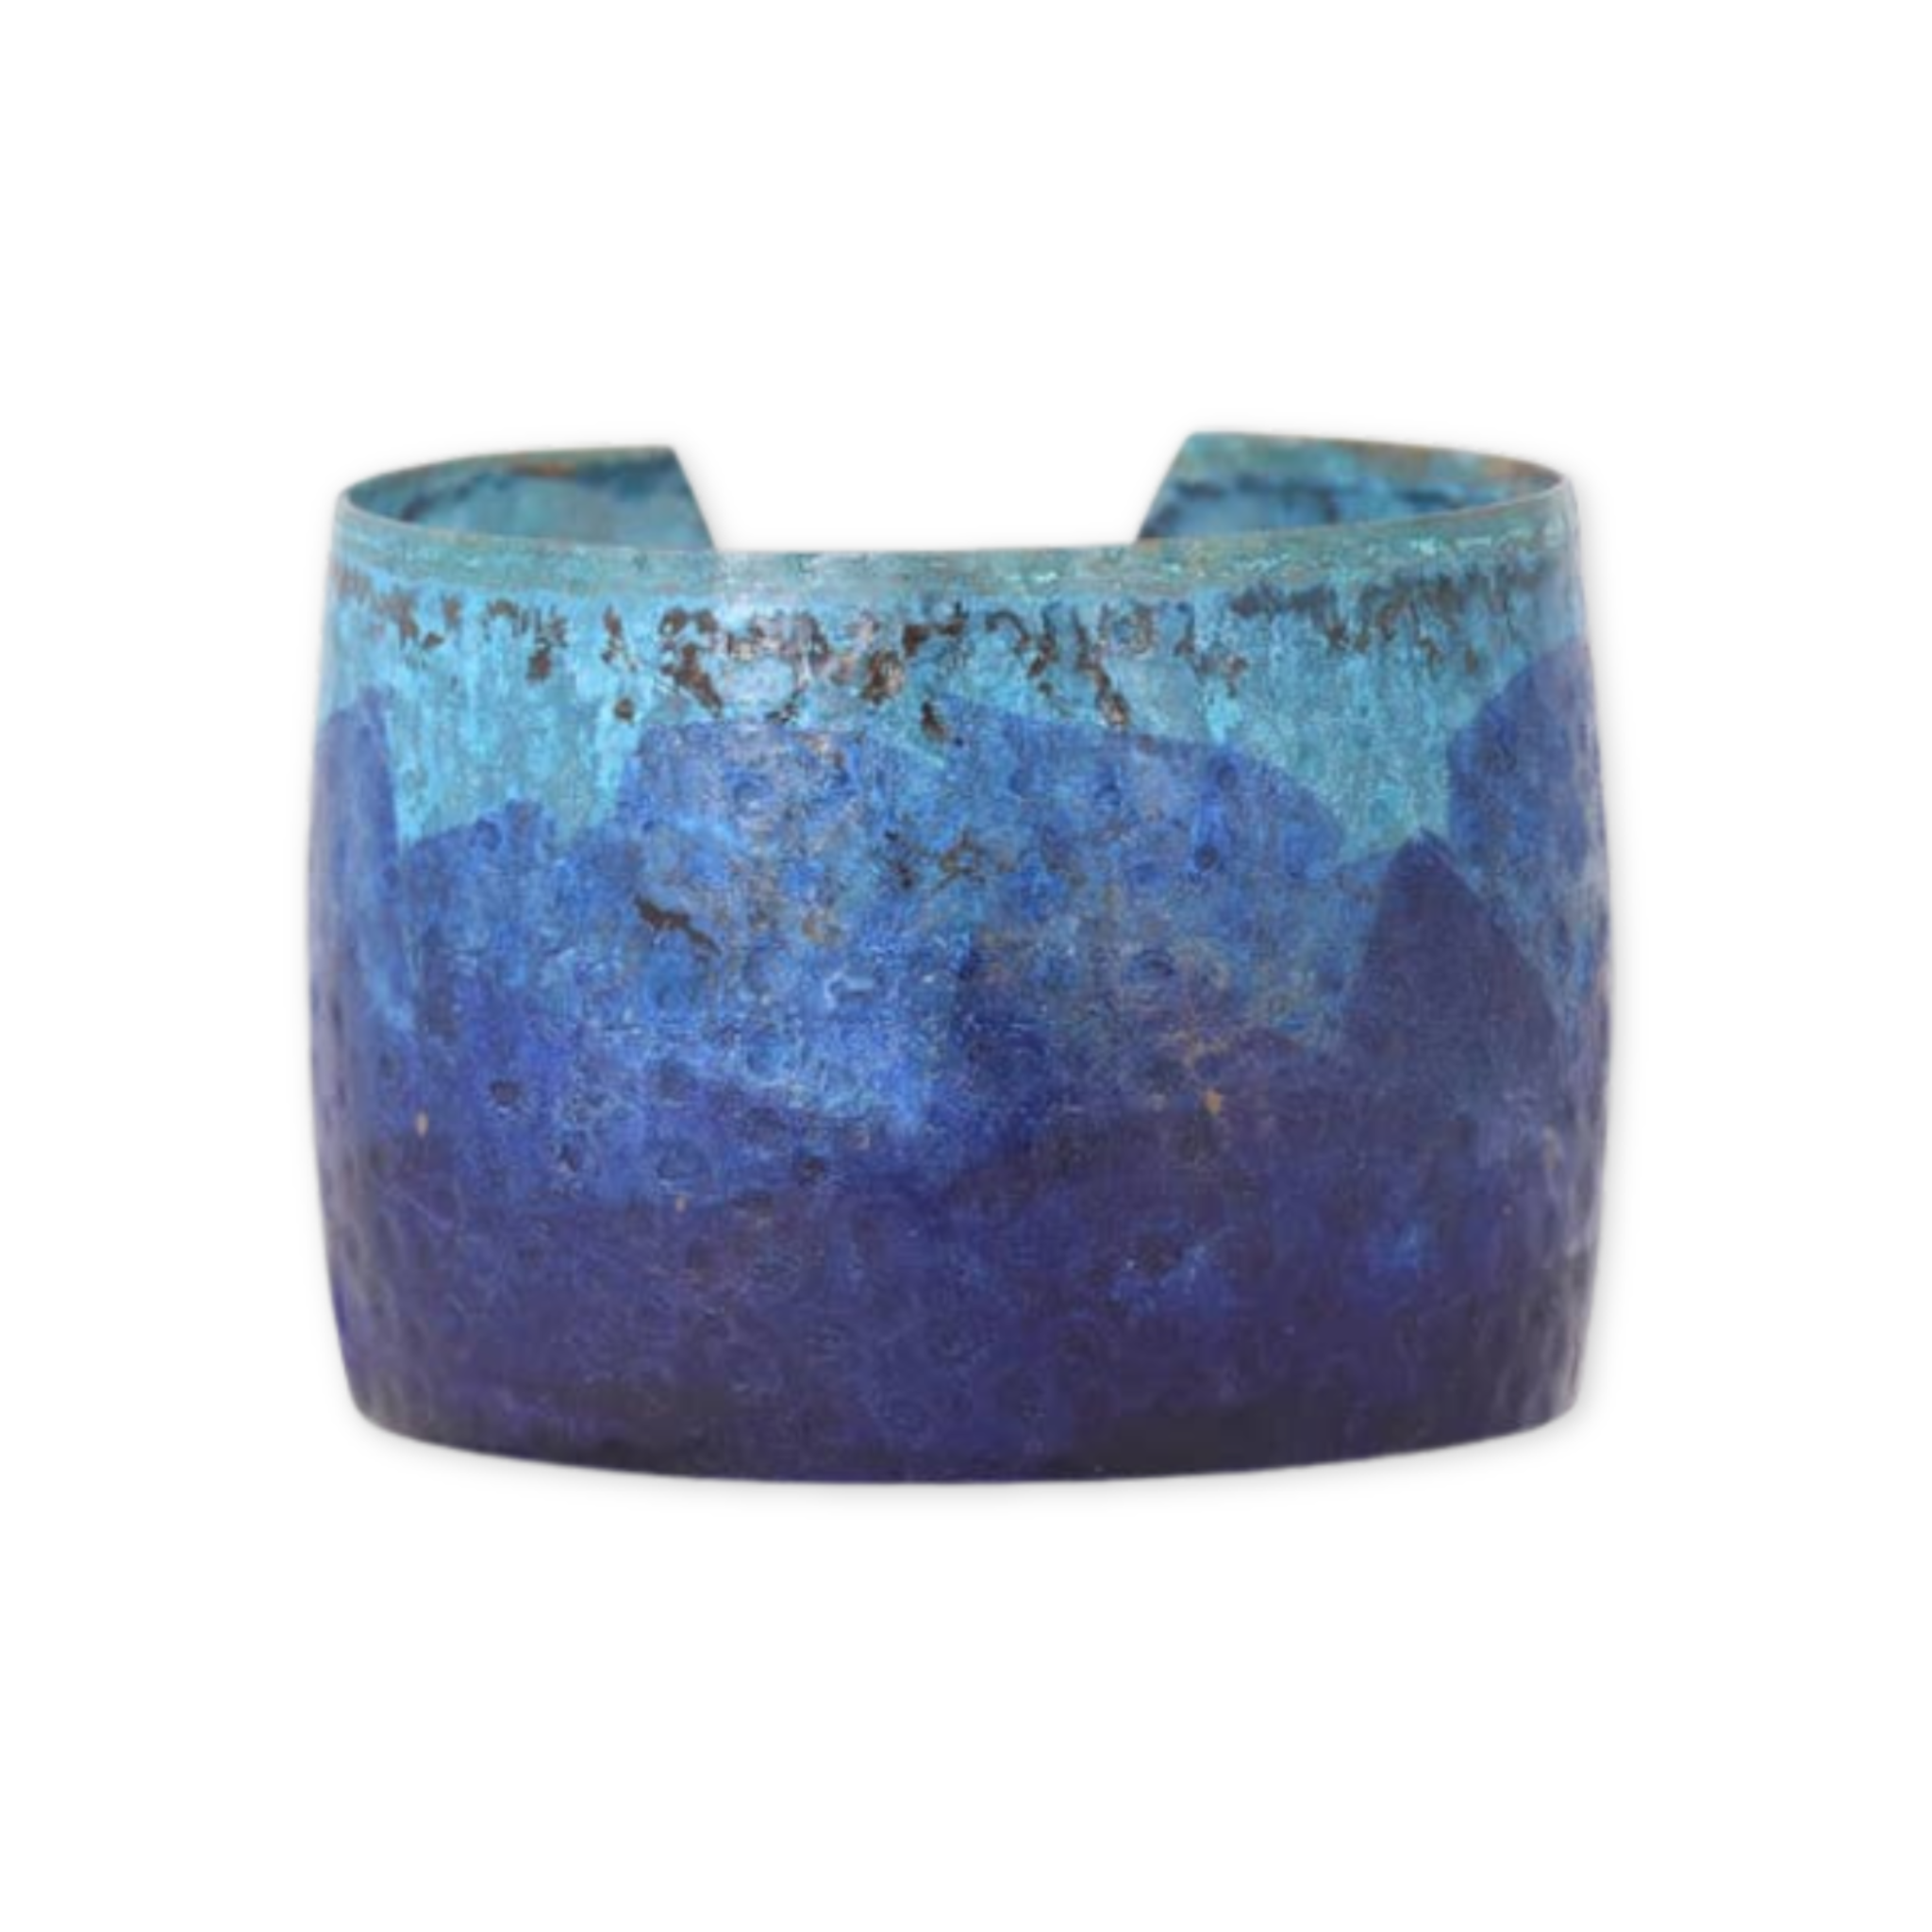 thick cuff bracelet with blue shades and patina